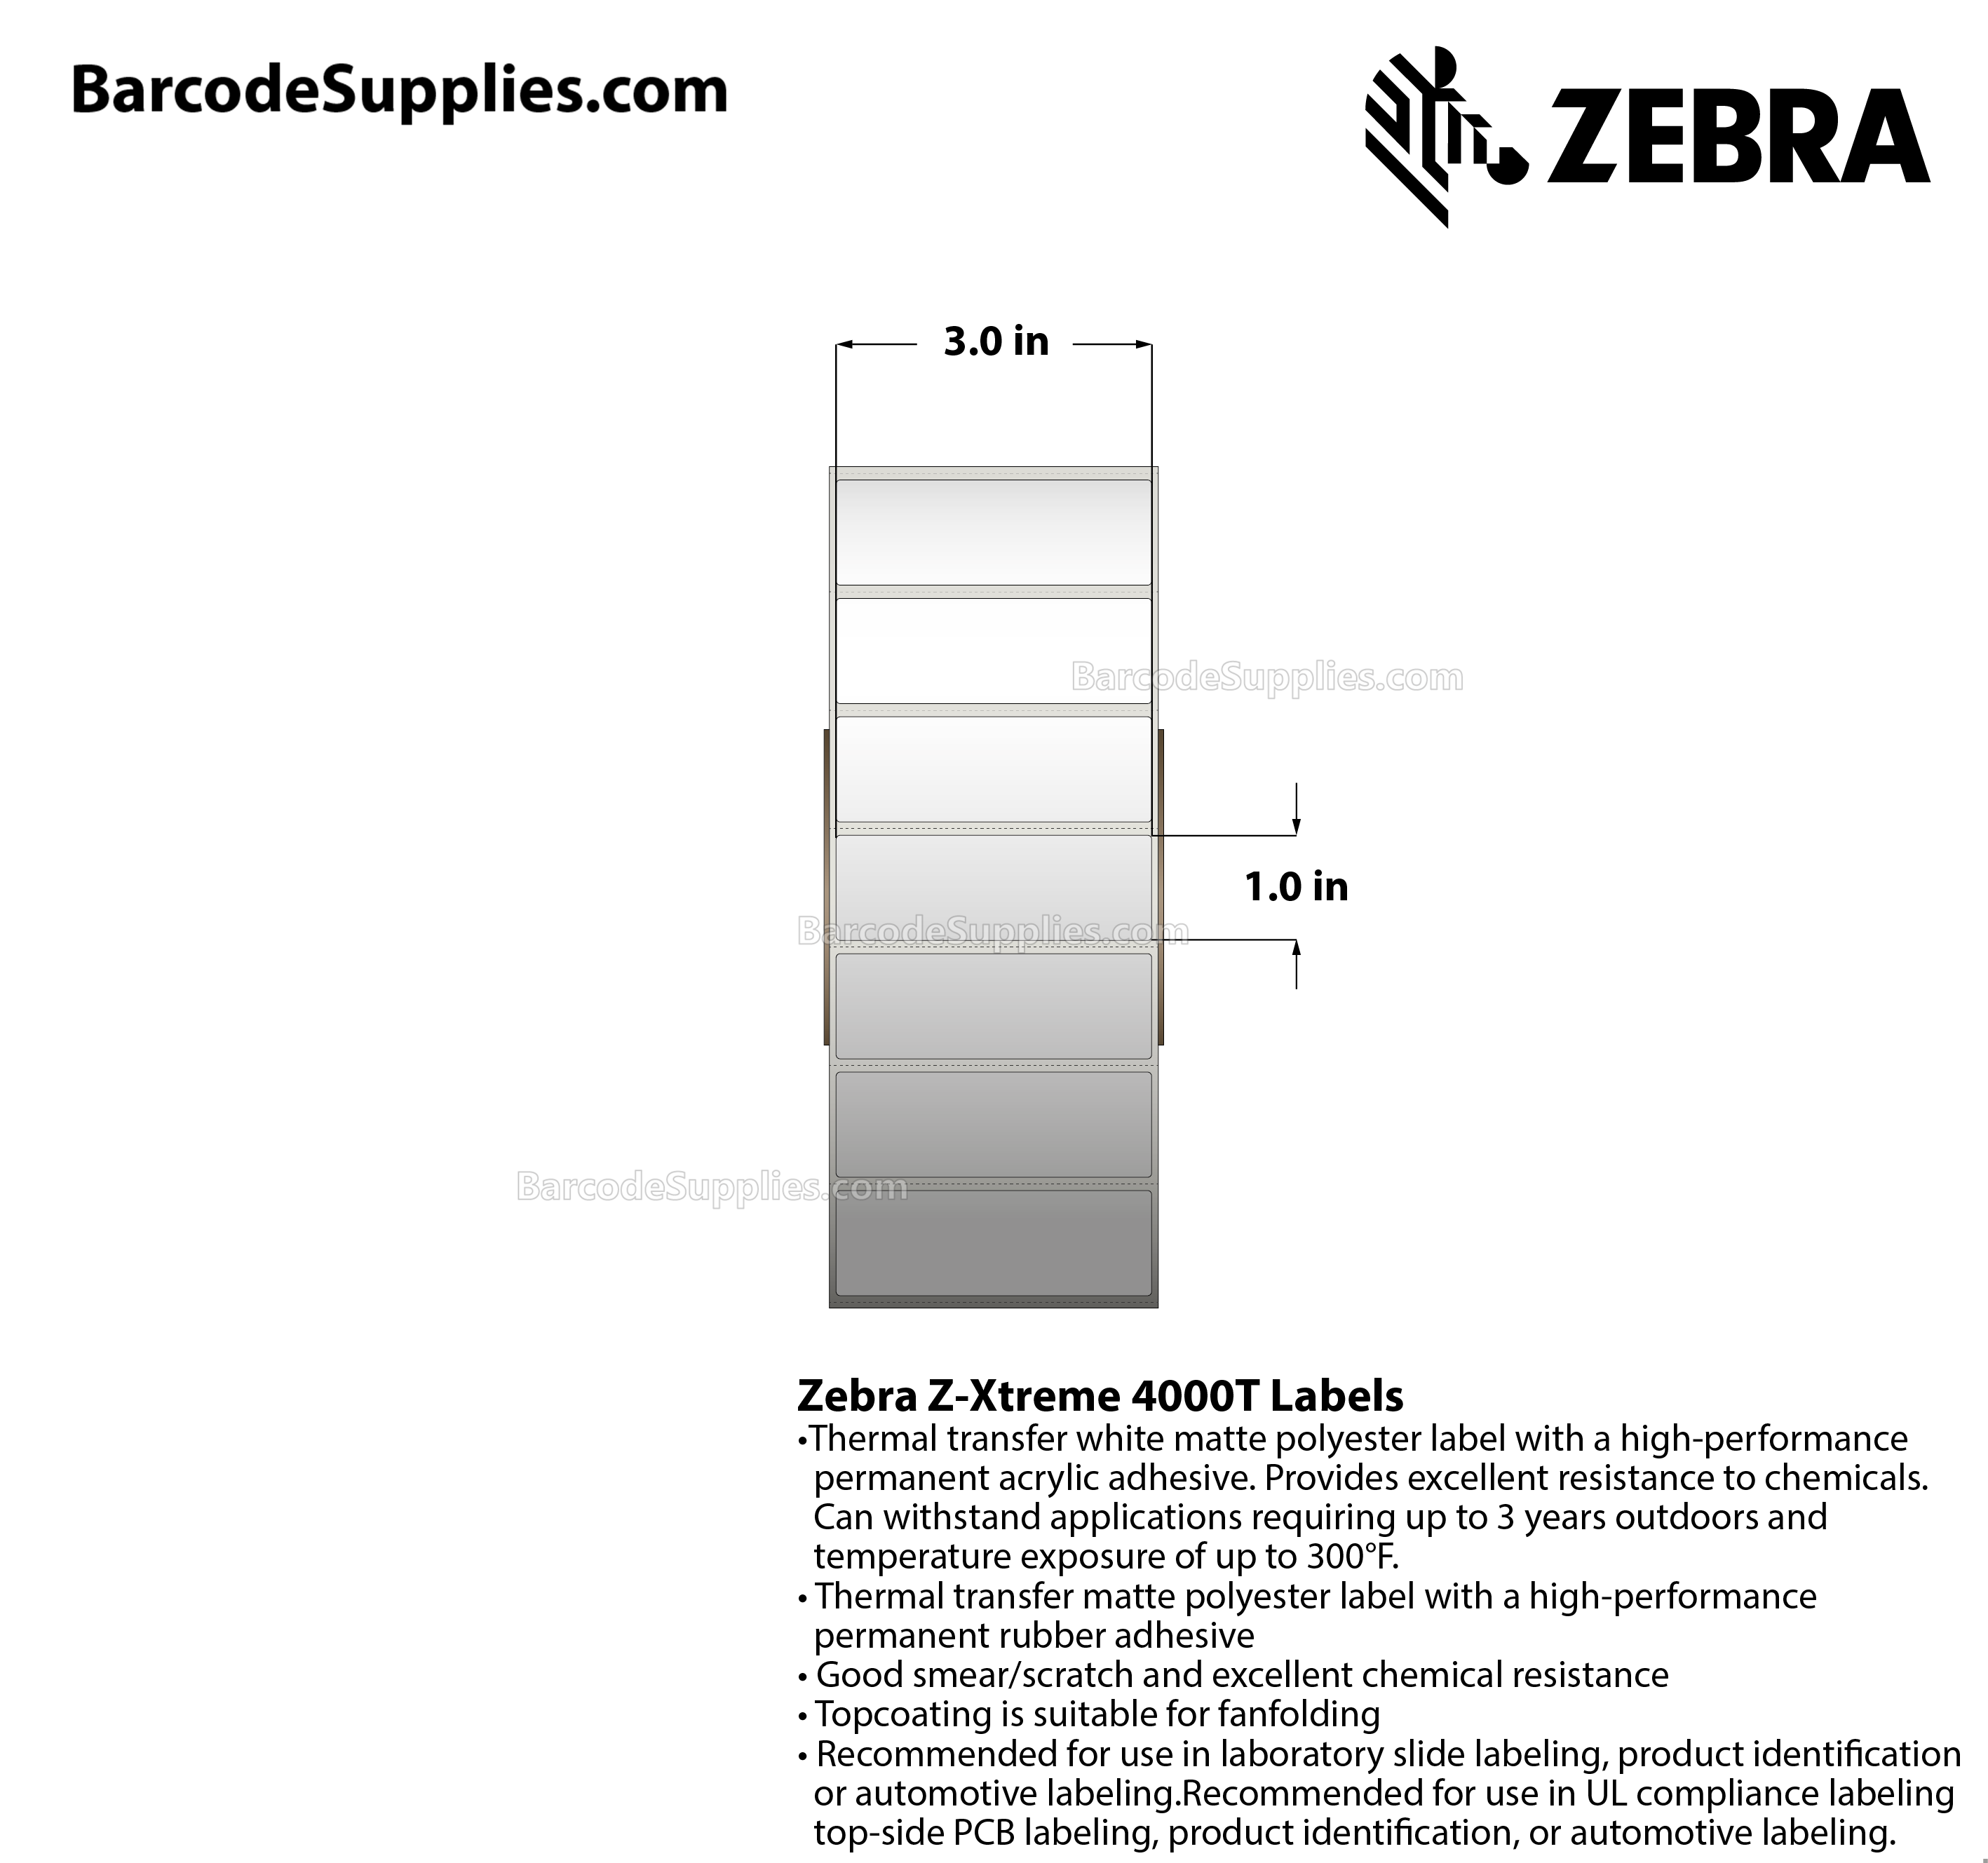 3 x 1 Thermal Transfer White Z-Xtreme 4000T White Labels With Permanent Adhesive - Perforated - 3000 Labels Per Roll - Carton Of 1 Rolls - 3000 Labels Total - MPN: 10023245